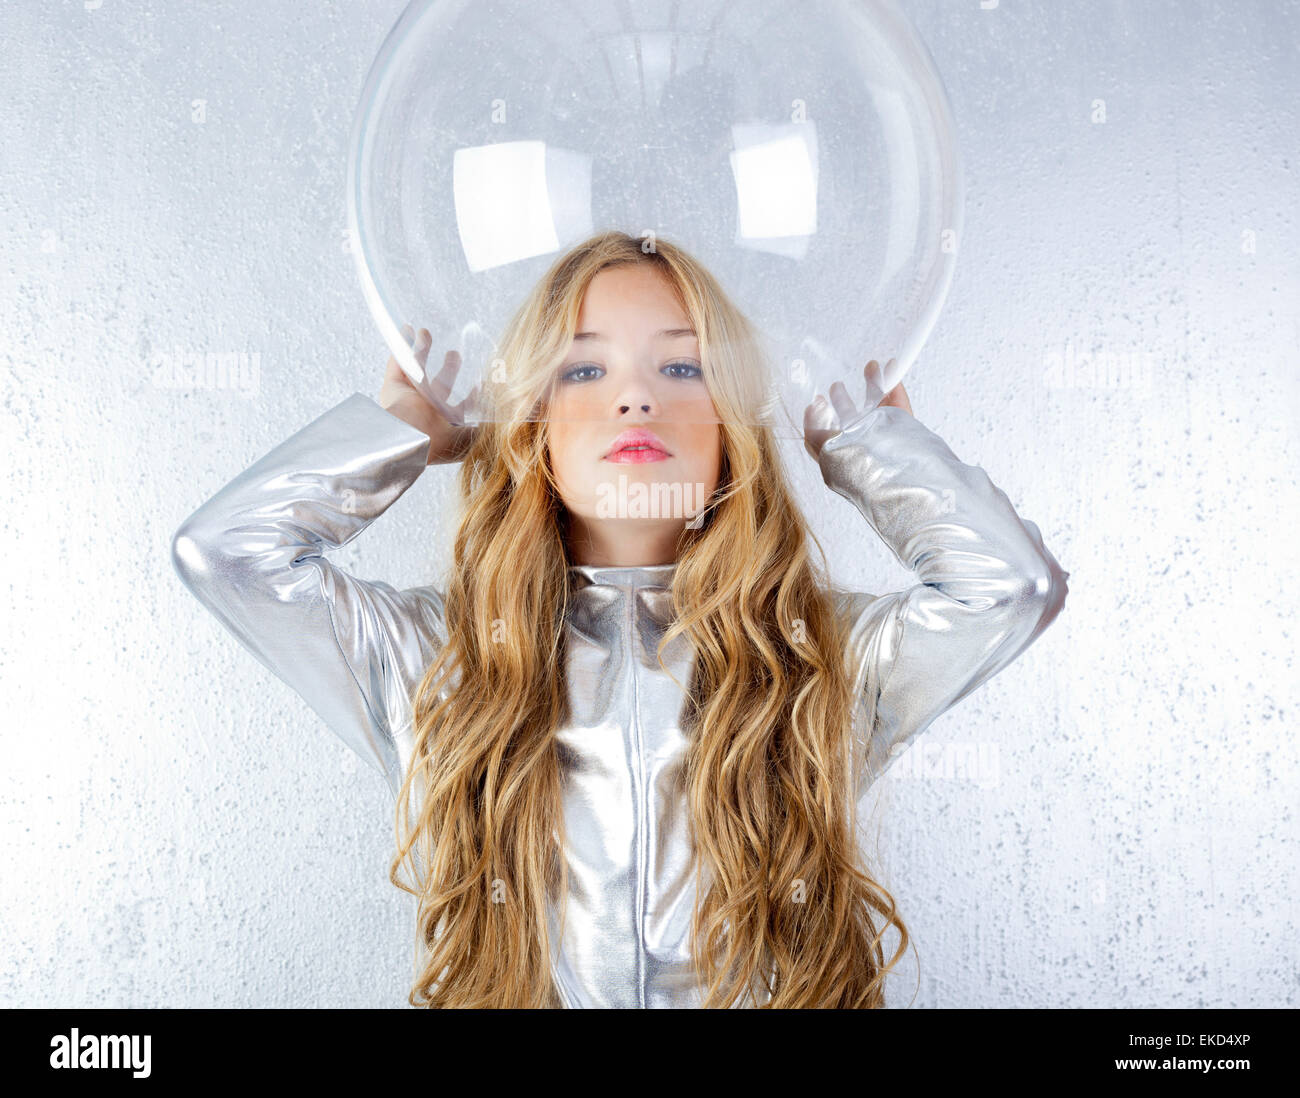 Astronaut girl with silver uniform and glass helmet Stock Photo - Alamy